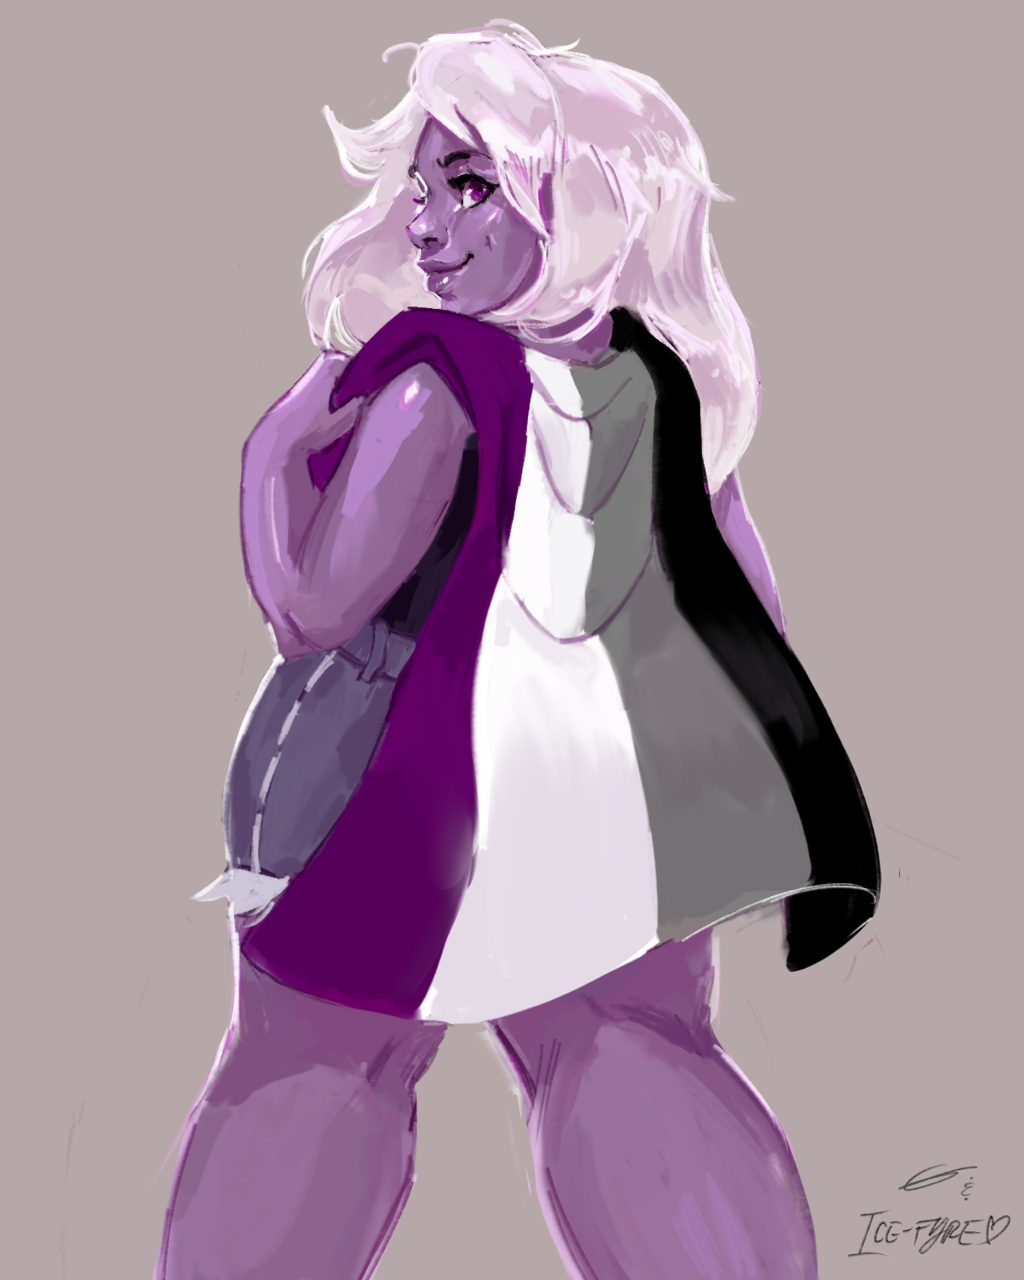 @ice-fyre and I wanted to do a collab for pride month (that starts today! yay!) so here they are! I sketched out the one of Amethyst and finished the one of Ruby and Sapphire, and vice versa. Thanks...